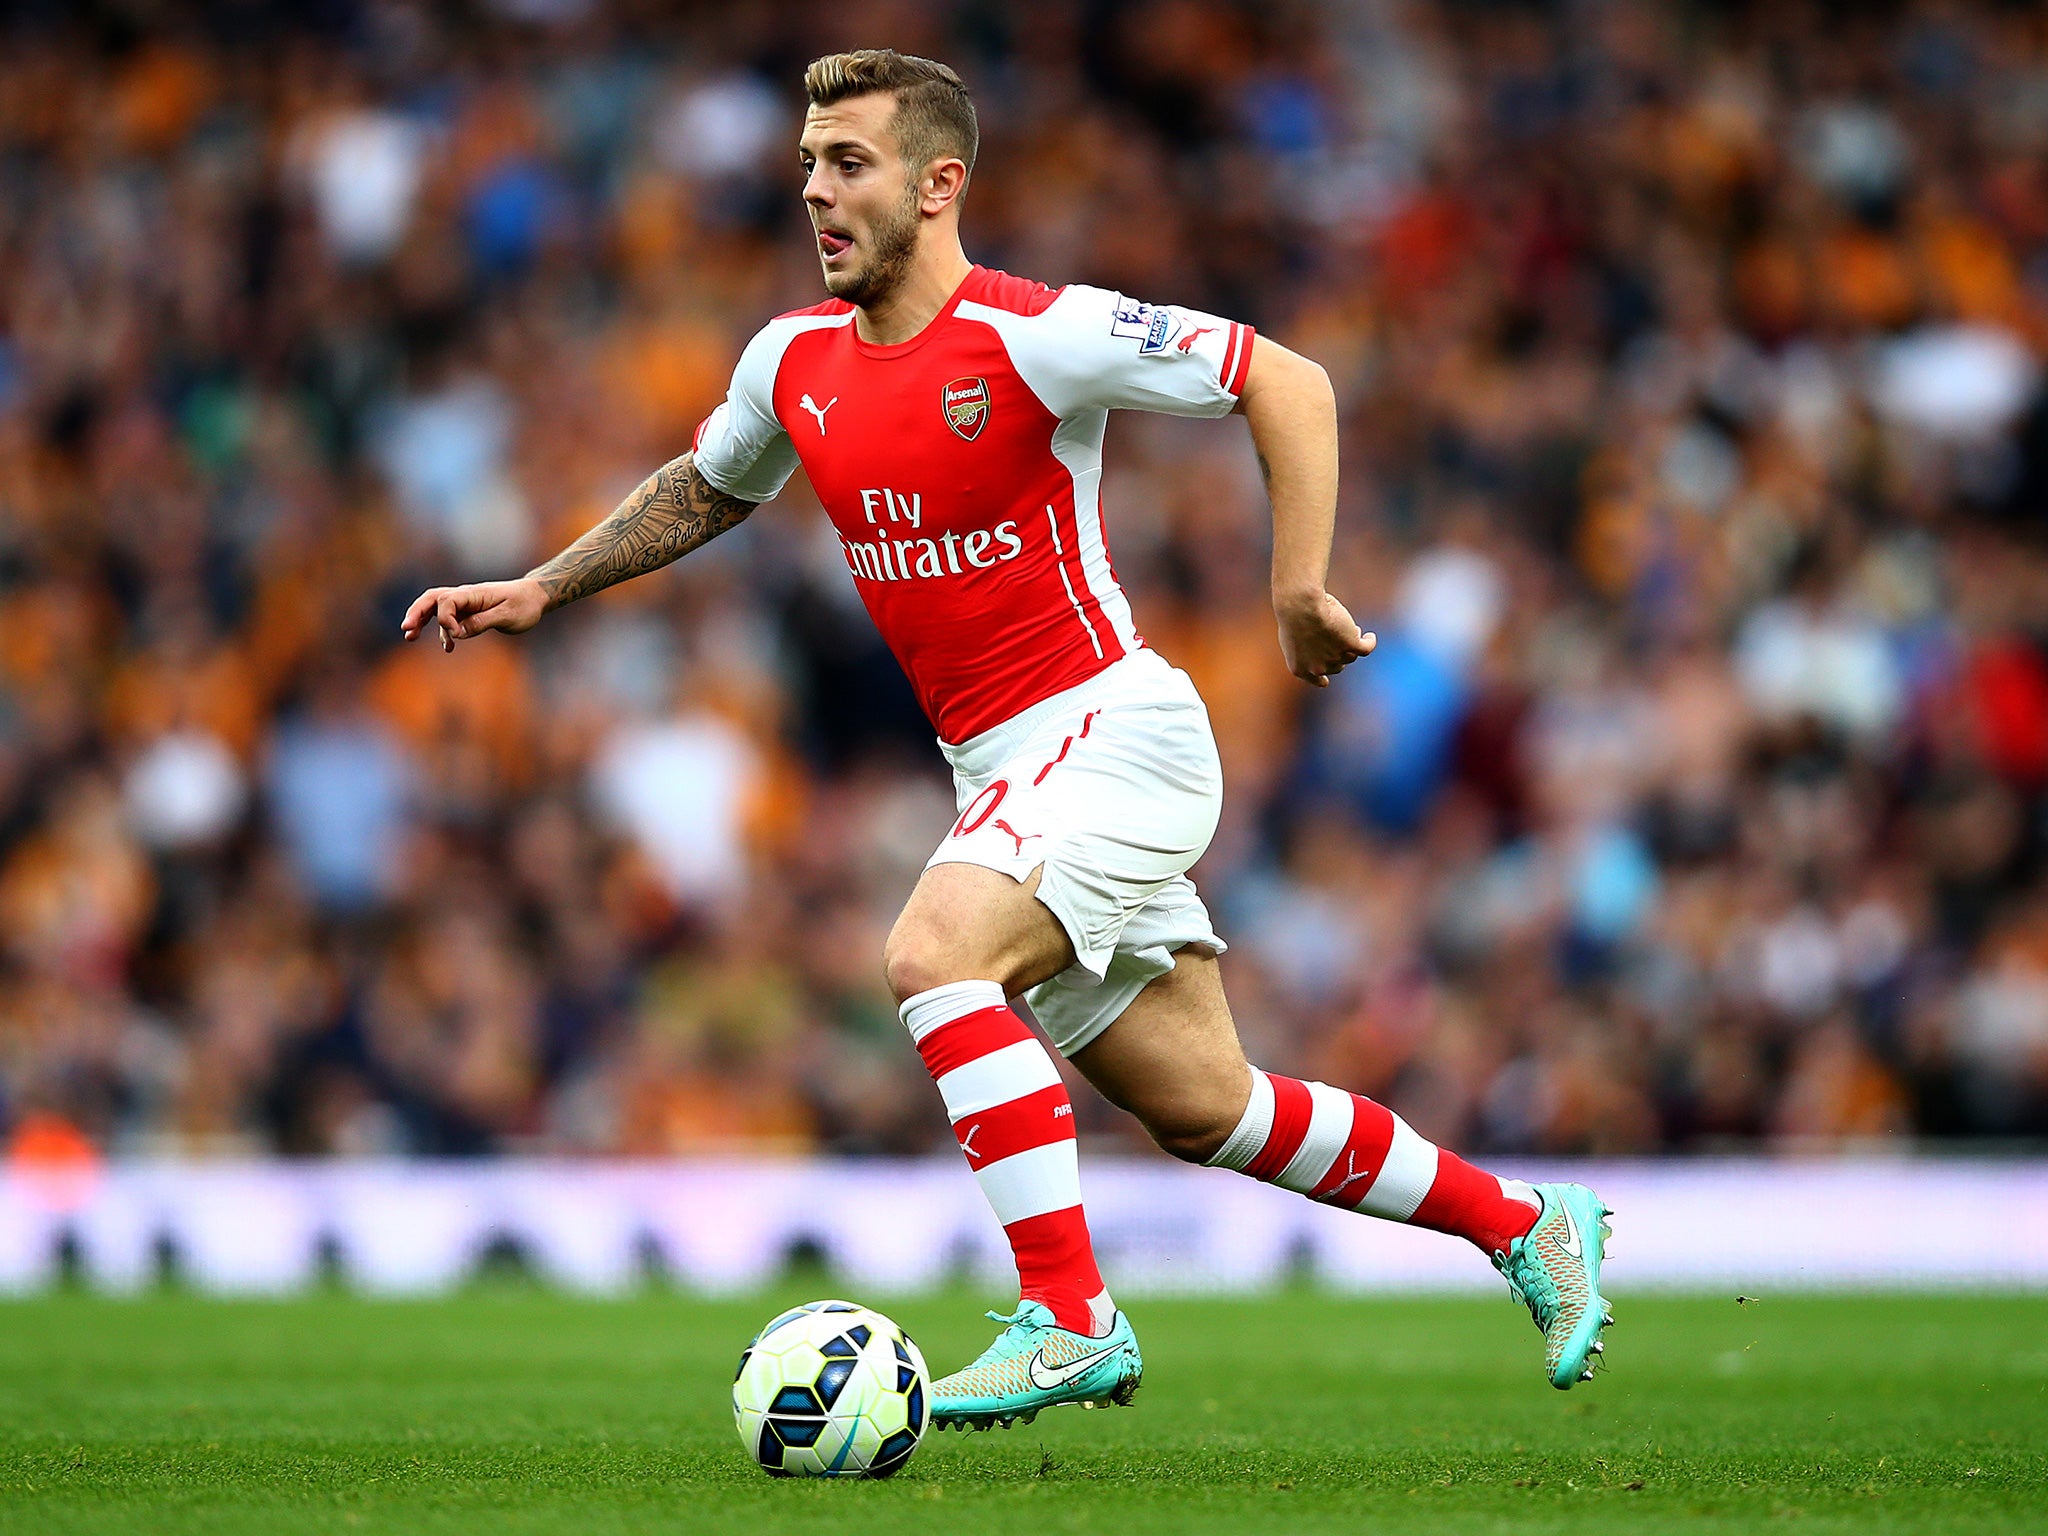 Jack Wilshere is making his first start since November for the Gunners